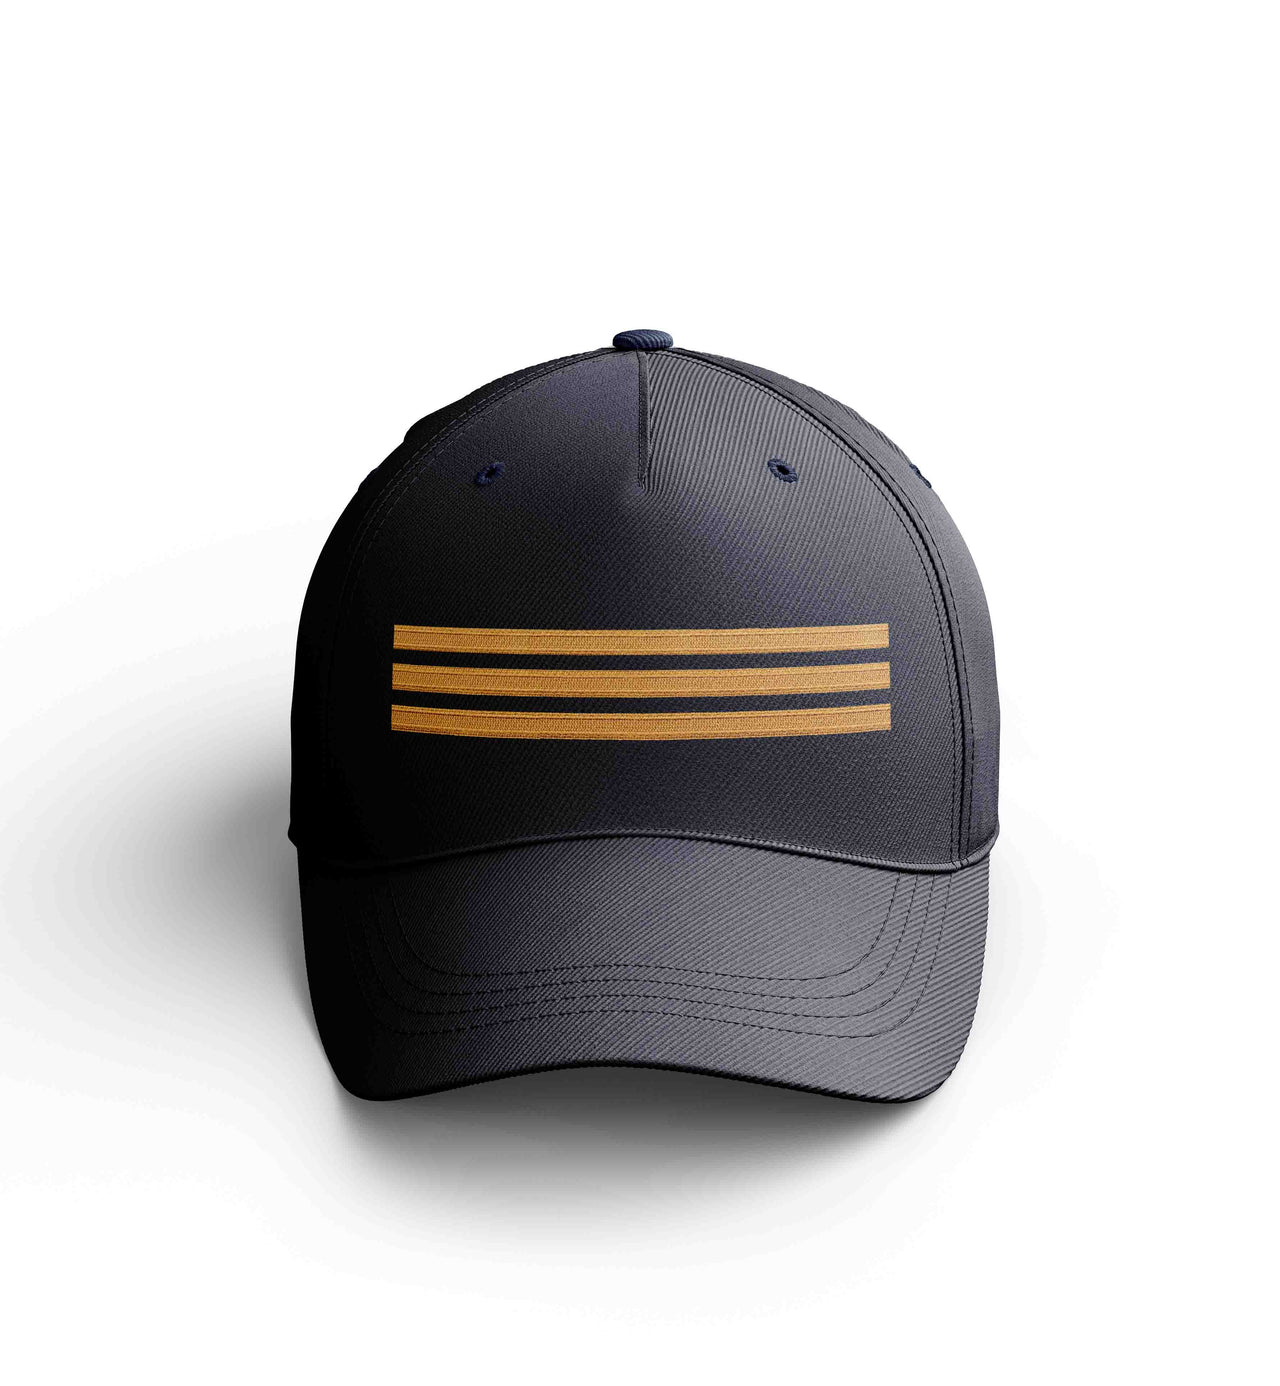 Customizable Name & Pilot Epaulette (3 Lines) Embroidered Hats